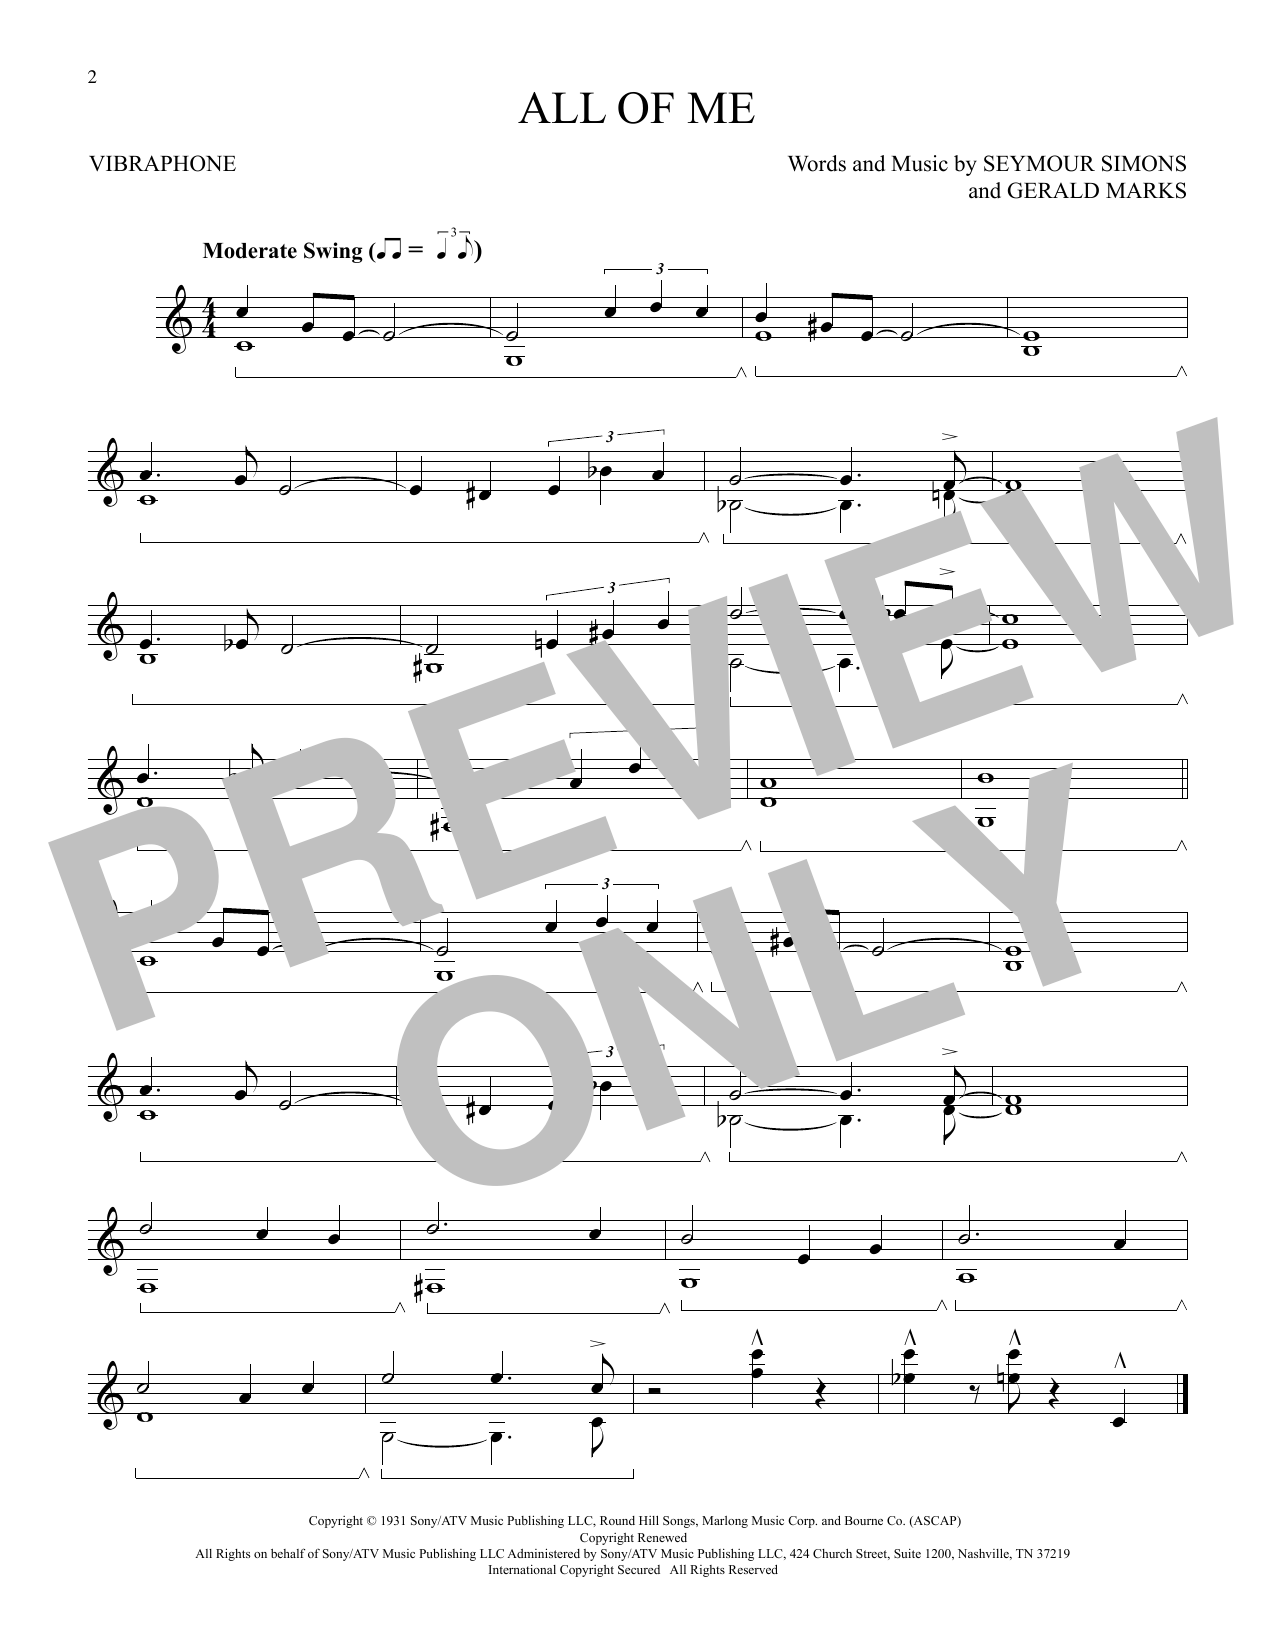 Download Seymour Simons and Gerald Marks All Of Me Sheet Music